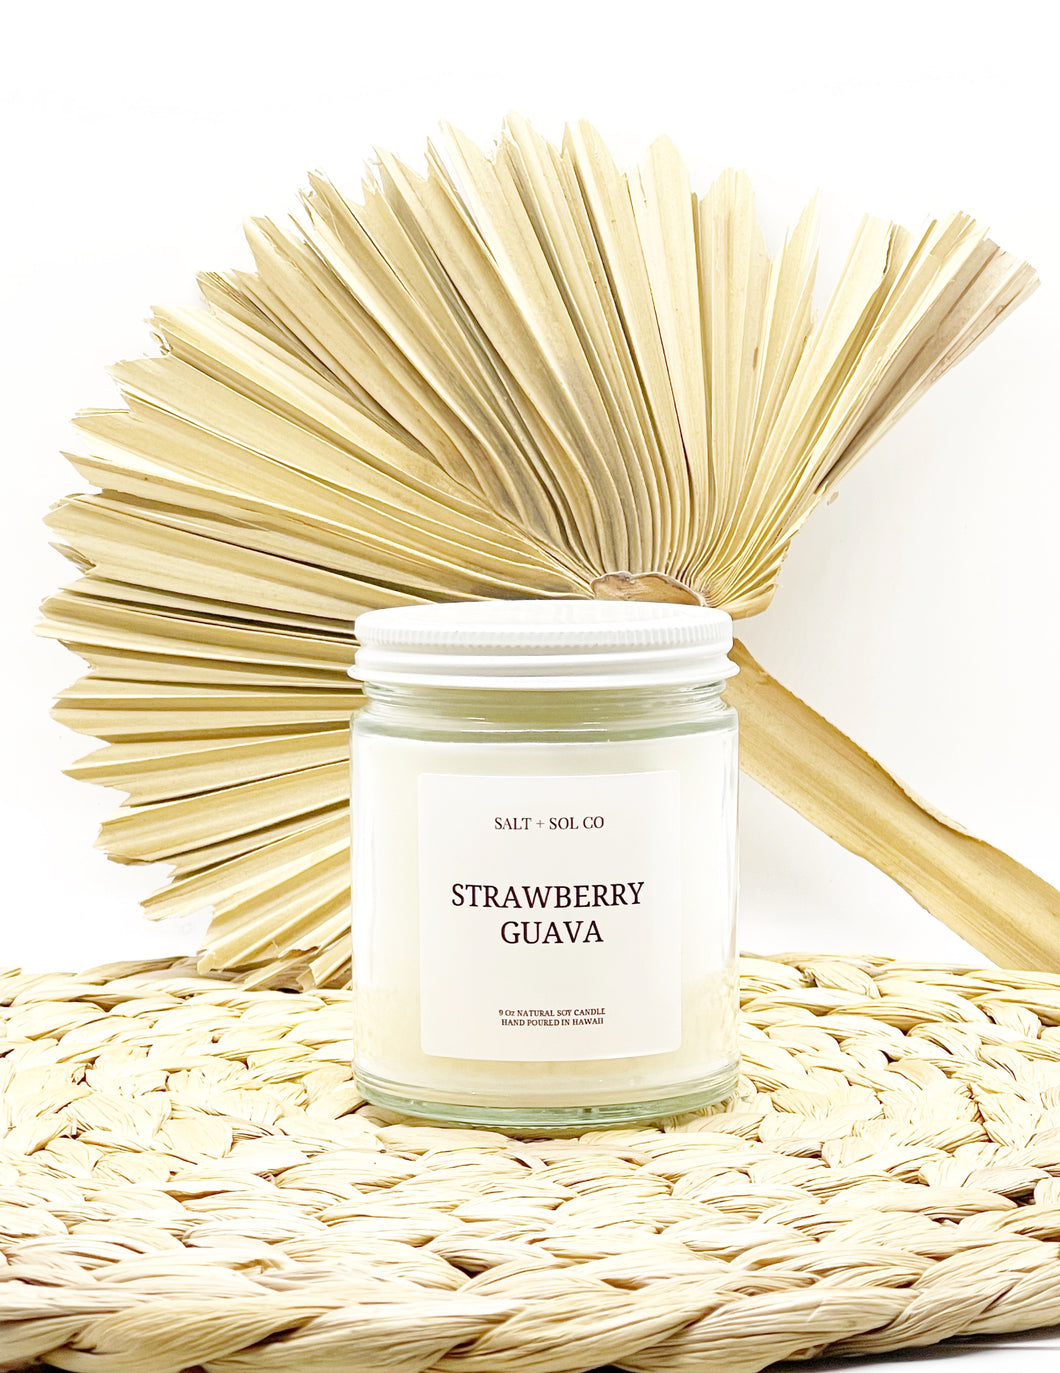 Shop Strawberry Guava Soy Wax Candle for sale at Salt Sol Co Hawaii candle company